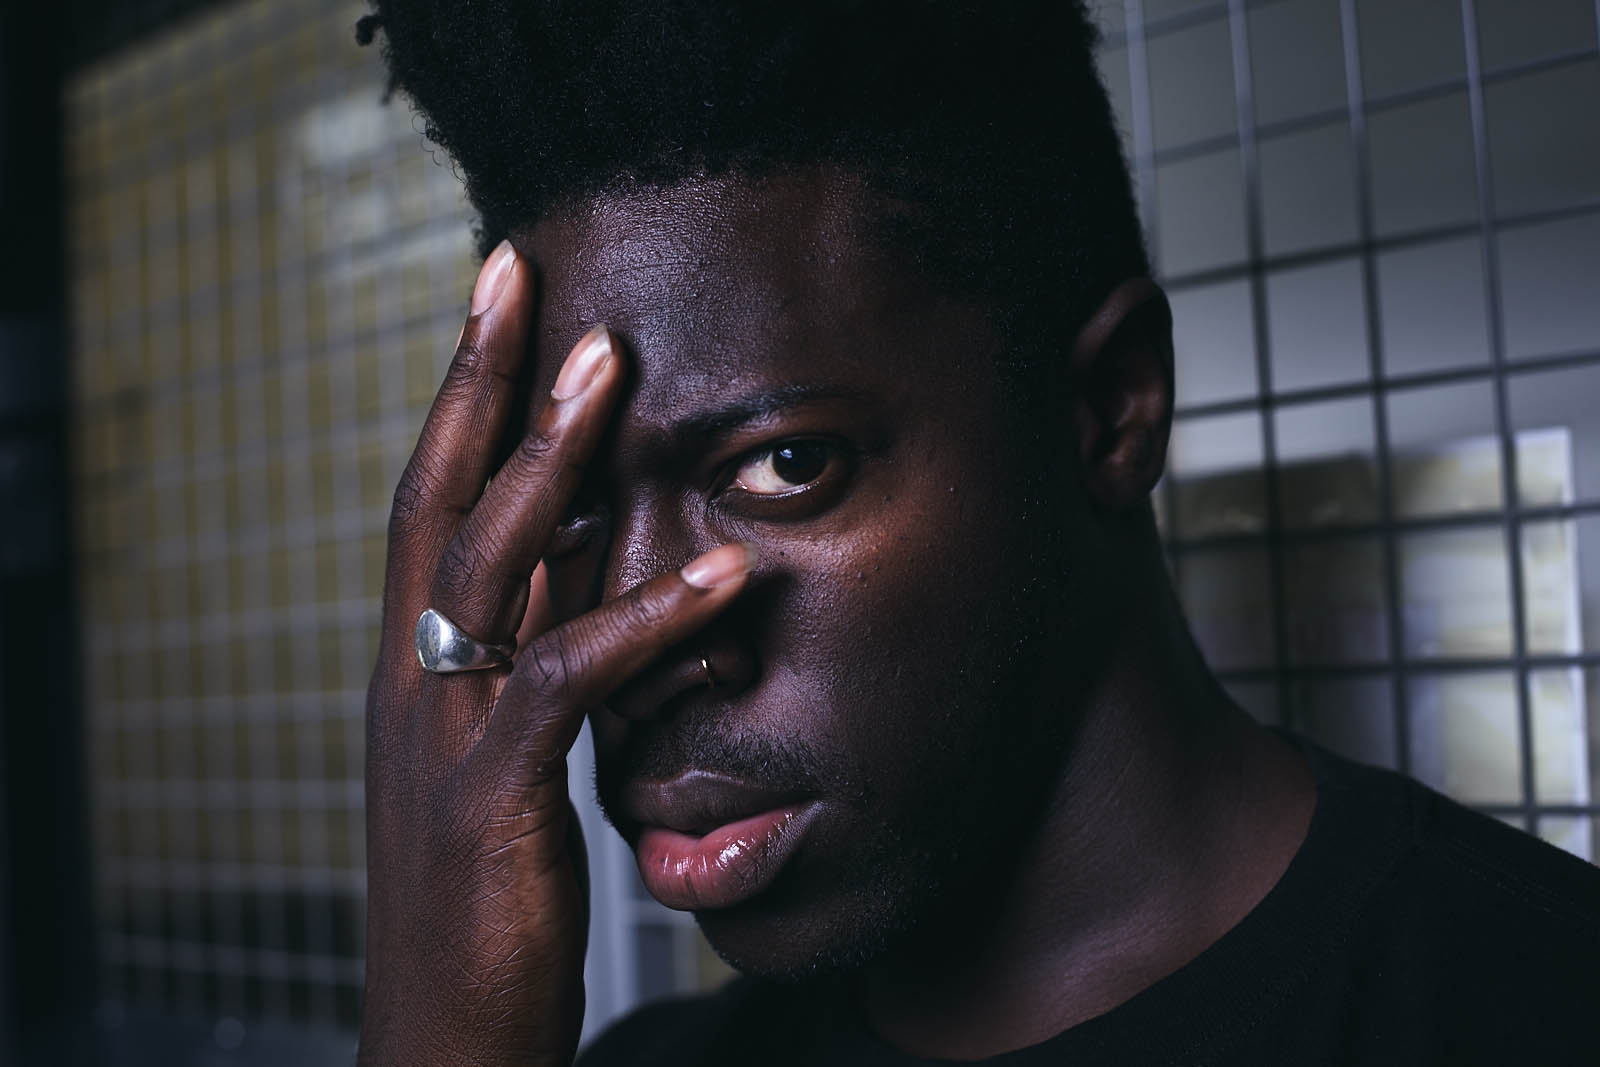 Moses Sumney's new song is heartbreakingly sad, and the video's a